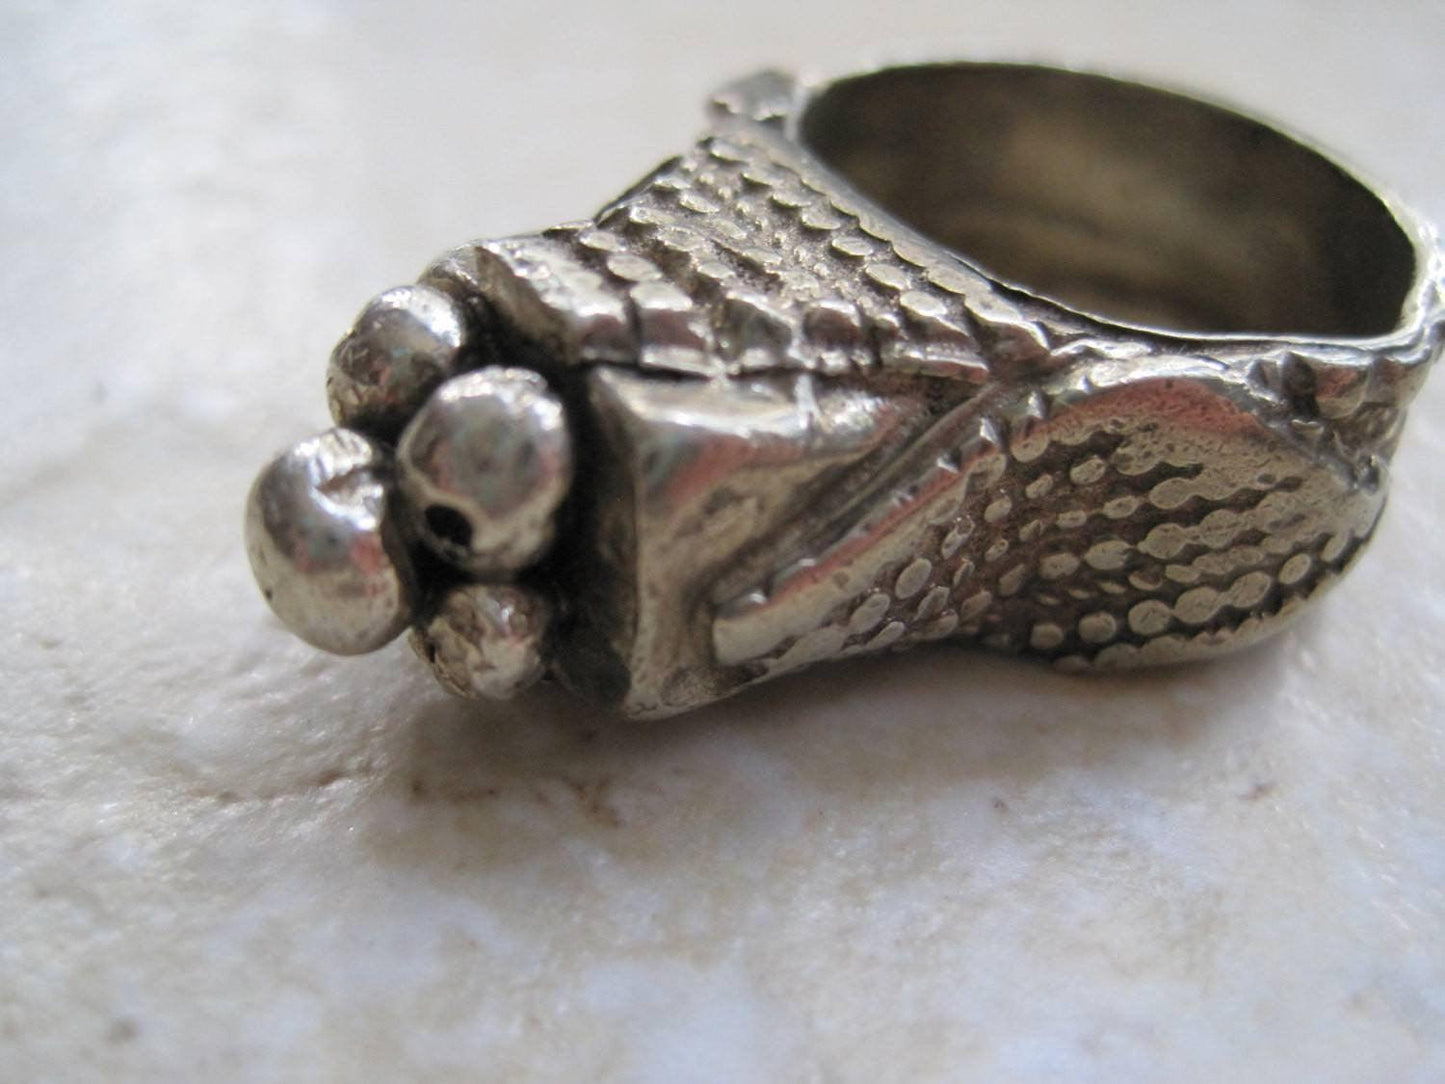 Vintage Bedouin Ring - Tribal Silver Tower Ring - Size 8 and a half - Anteeka